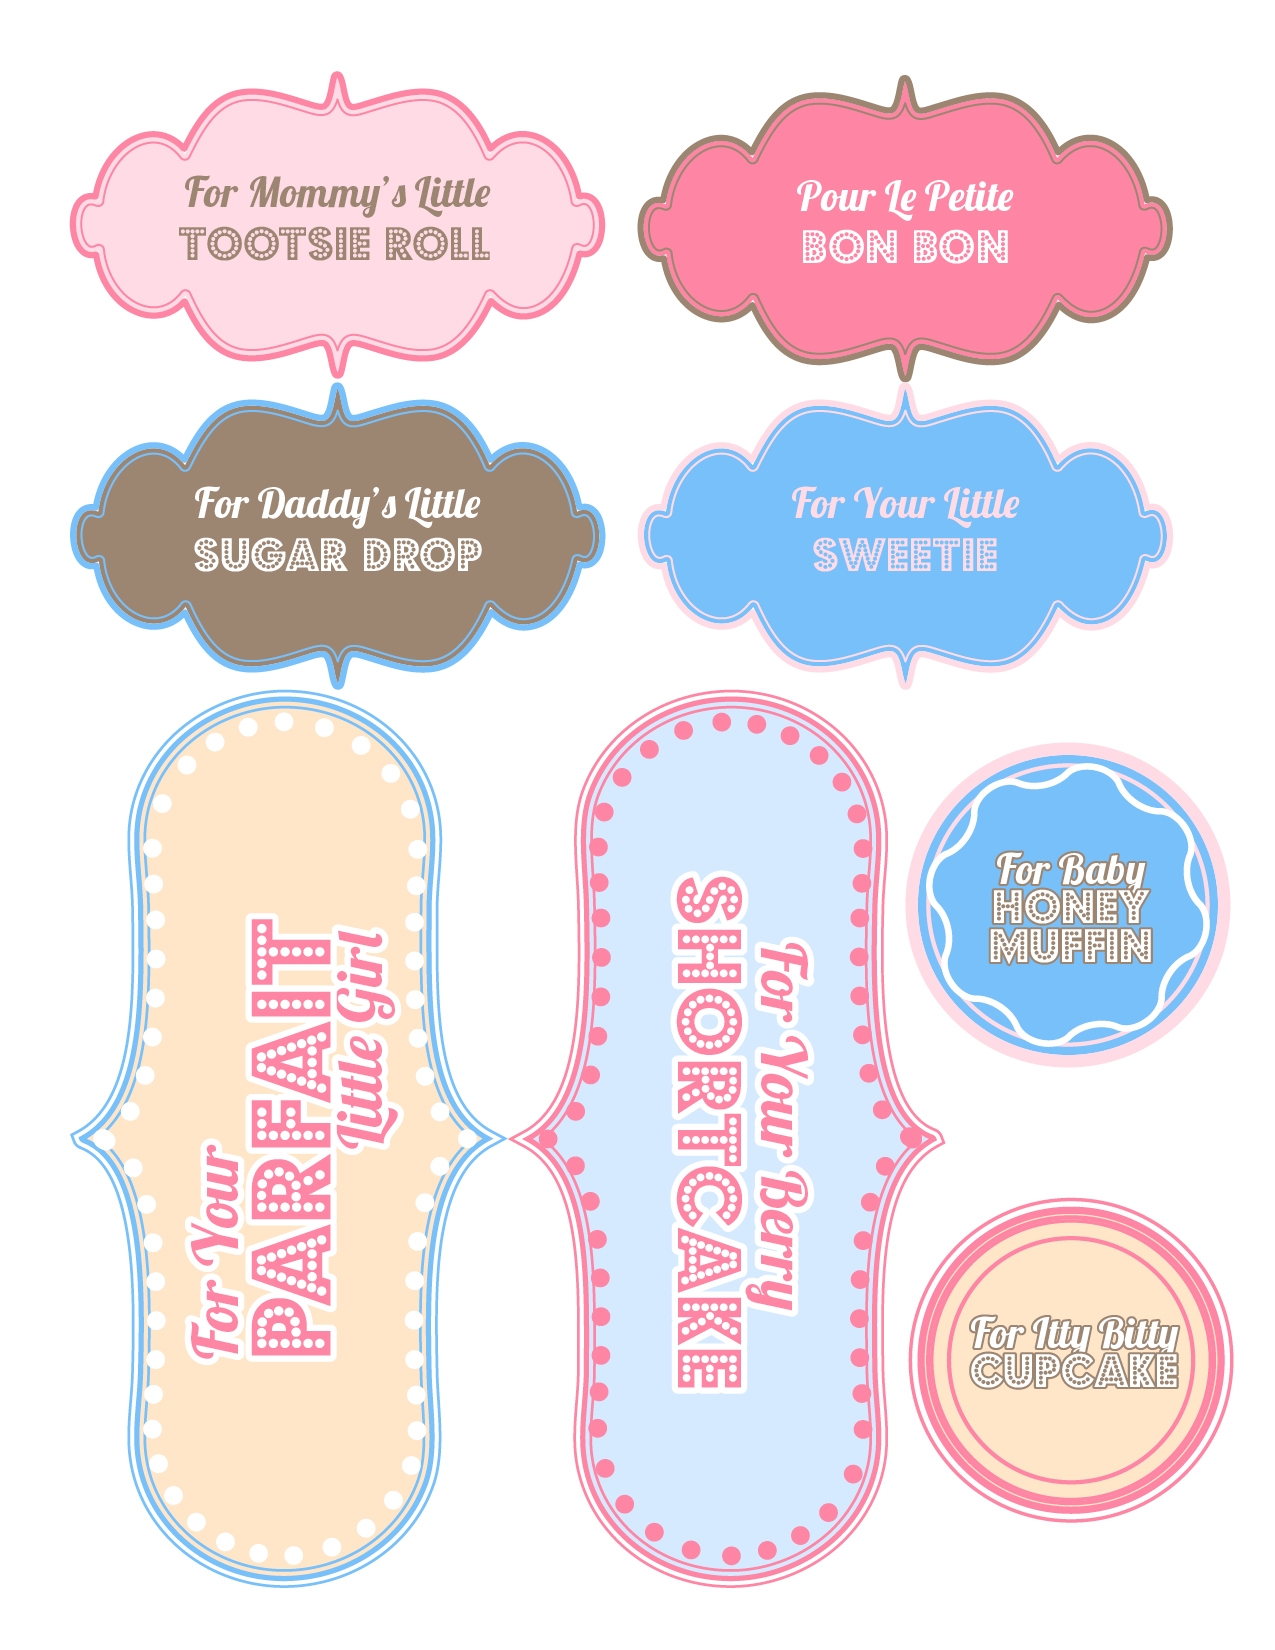 Baby Shower Gifts Free Printable Sweet Anne Designs - Free Printable Baby Shower Labels and Tags